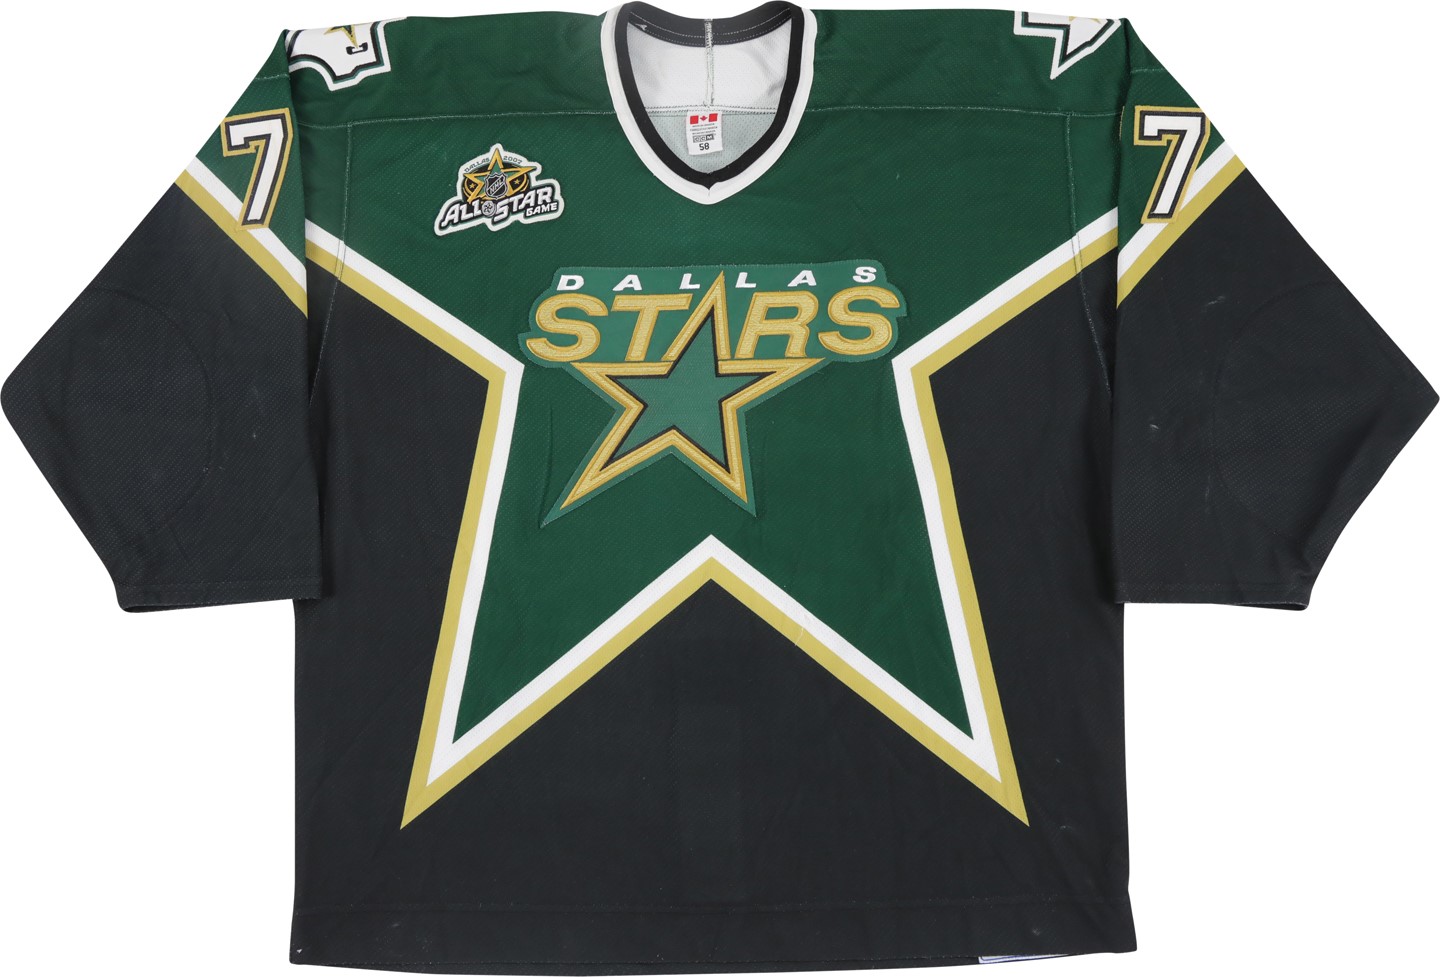 - 2006-07 Matthew Barnaby Dallas Stars Game Worn Jersey - Photo-Matched to Three Games (MeiGray)